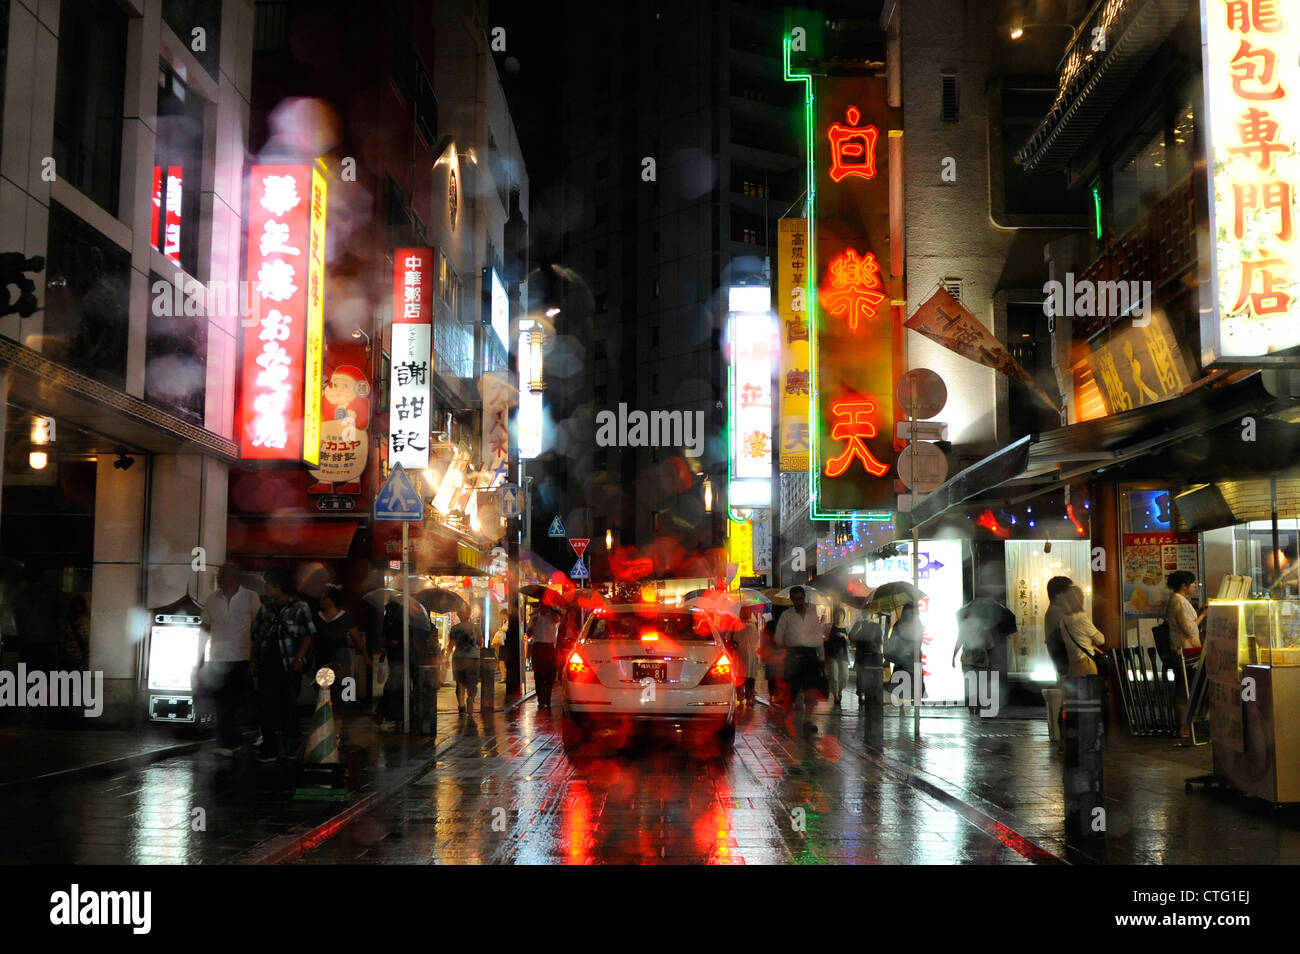 A car is pictured through a rain-covered windscreen on a street in China Town in Yokohama, Japan Stock Photo